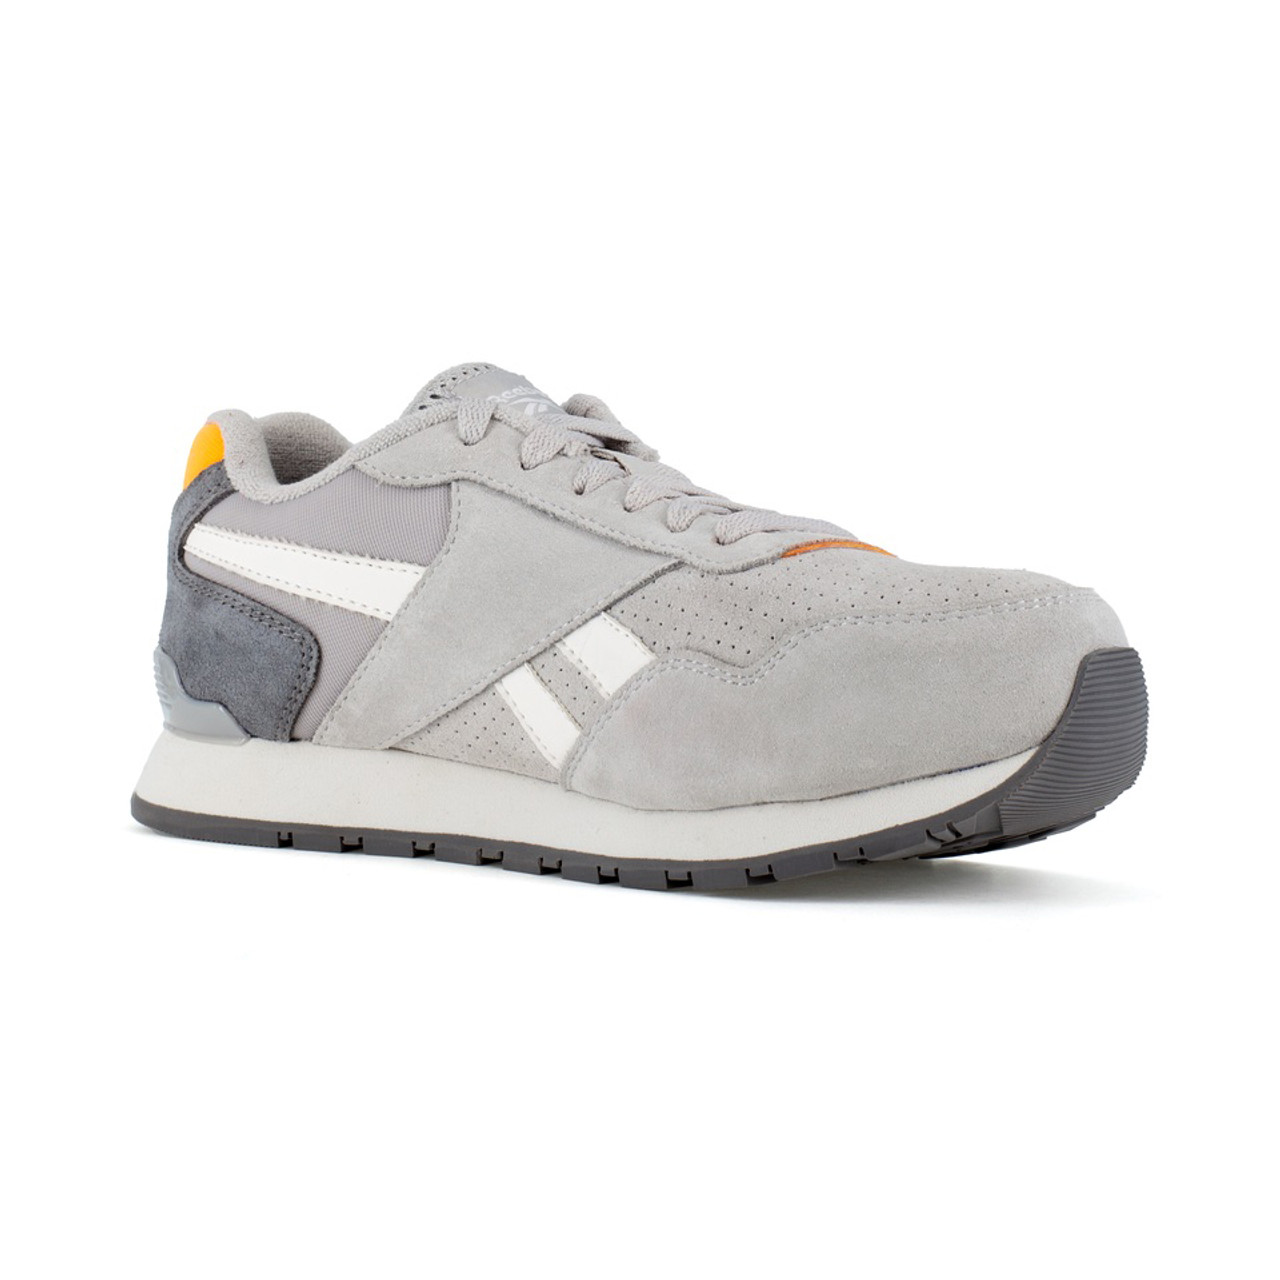 Reebok Harman #RB980 SD Athletic Composite Safety Toe Work Sneaker